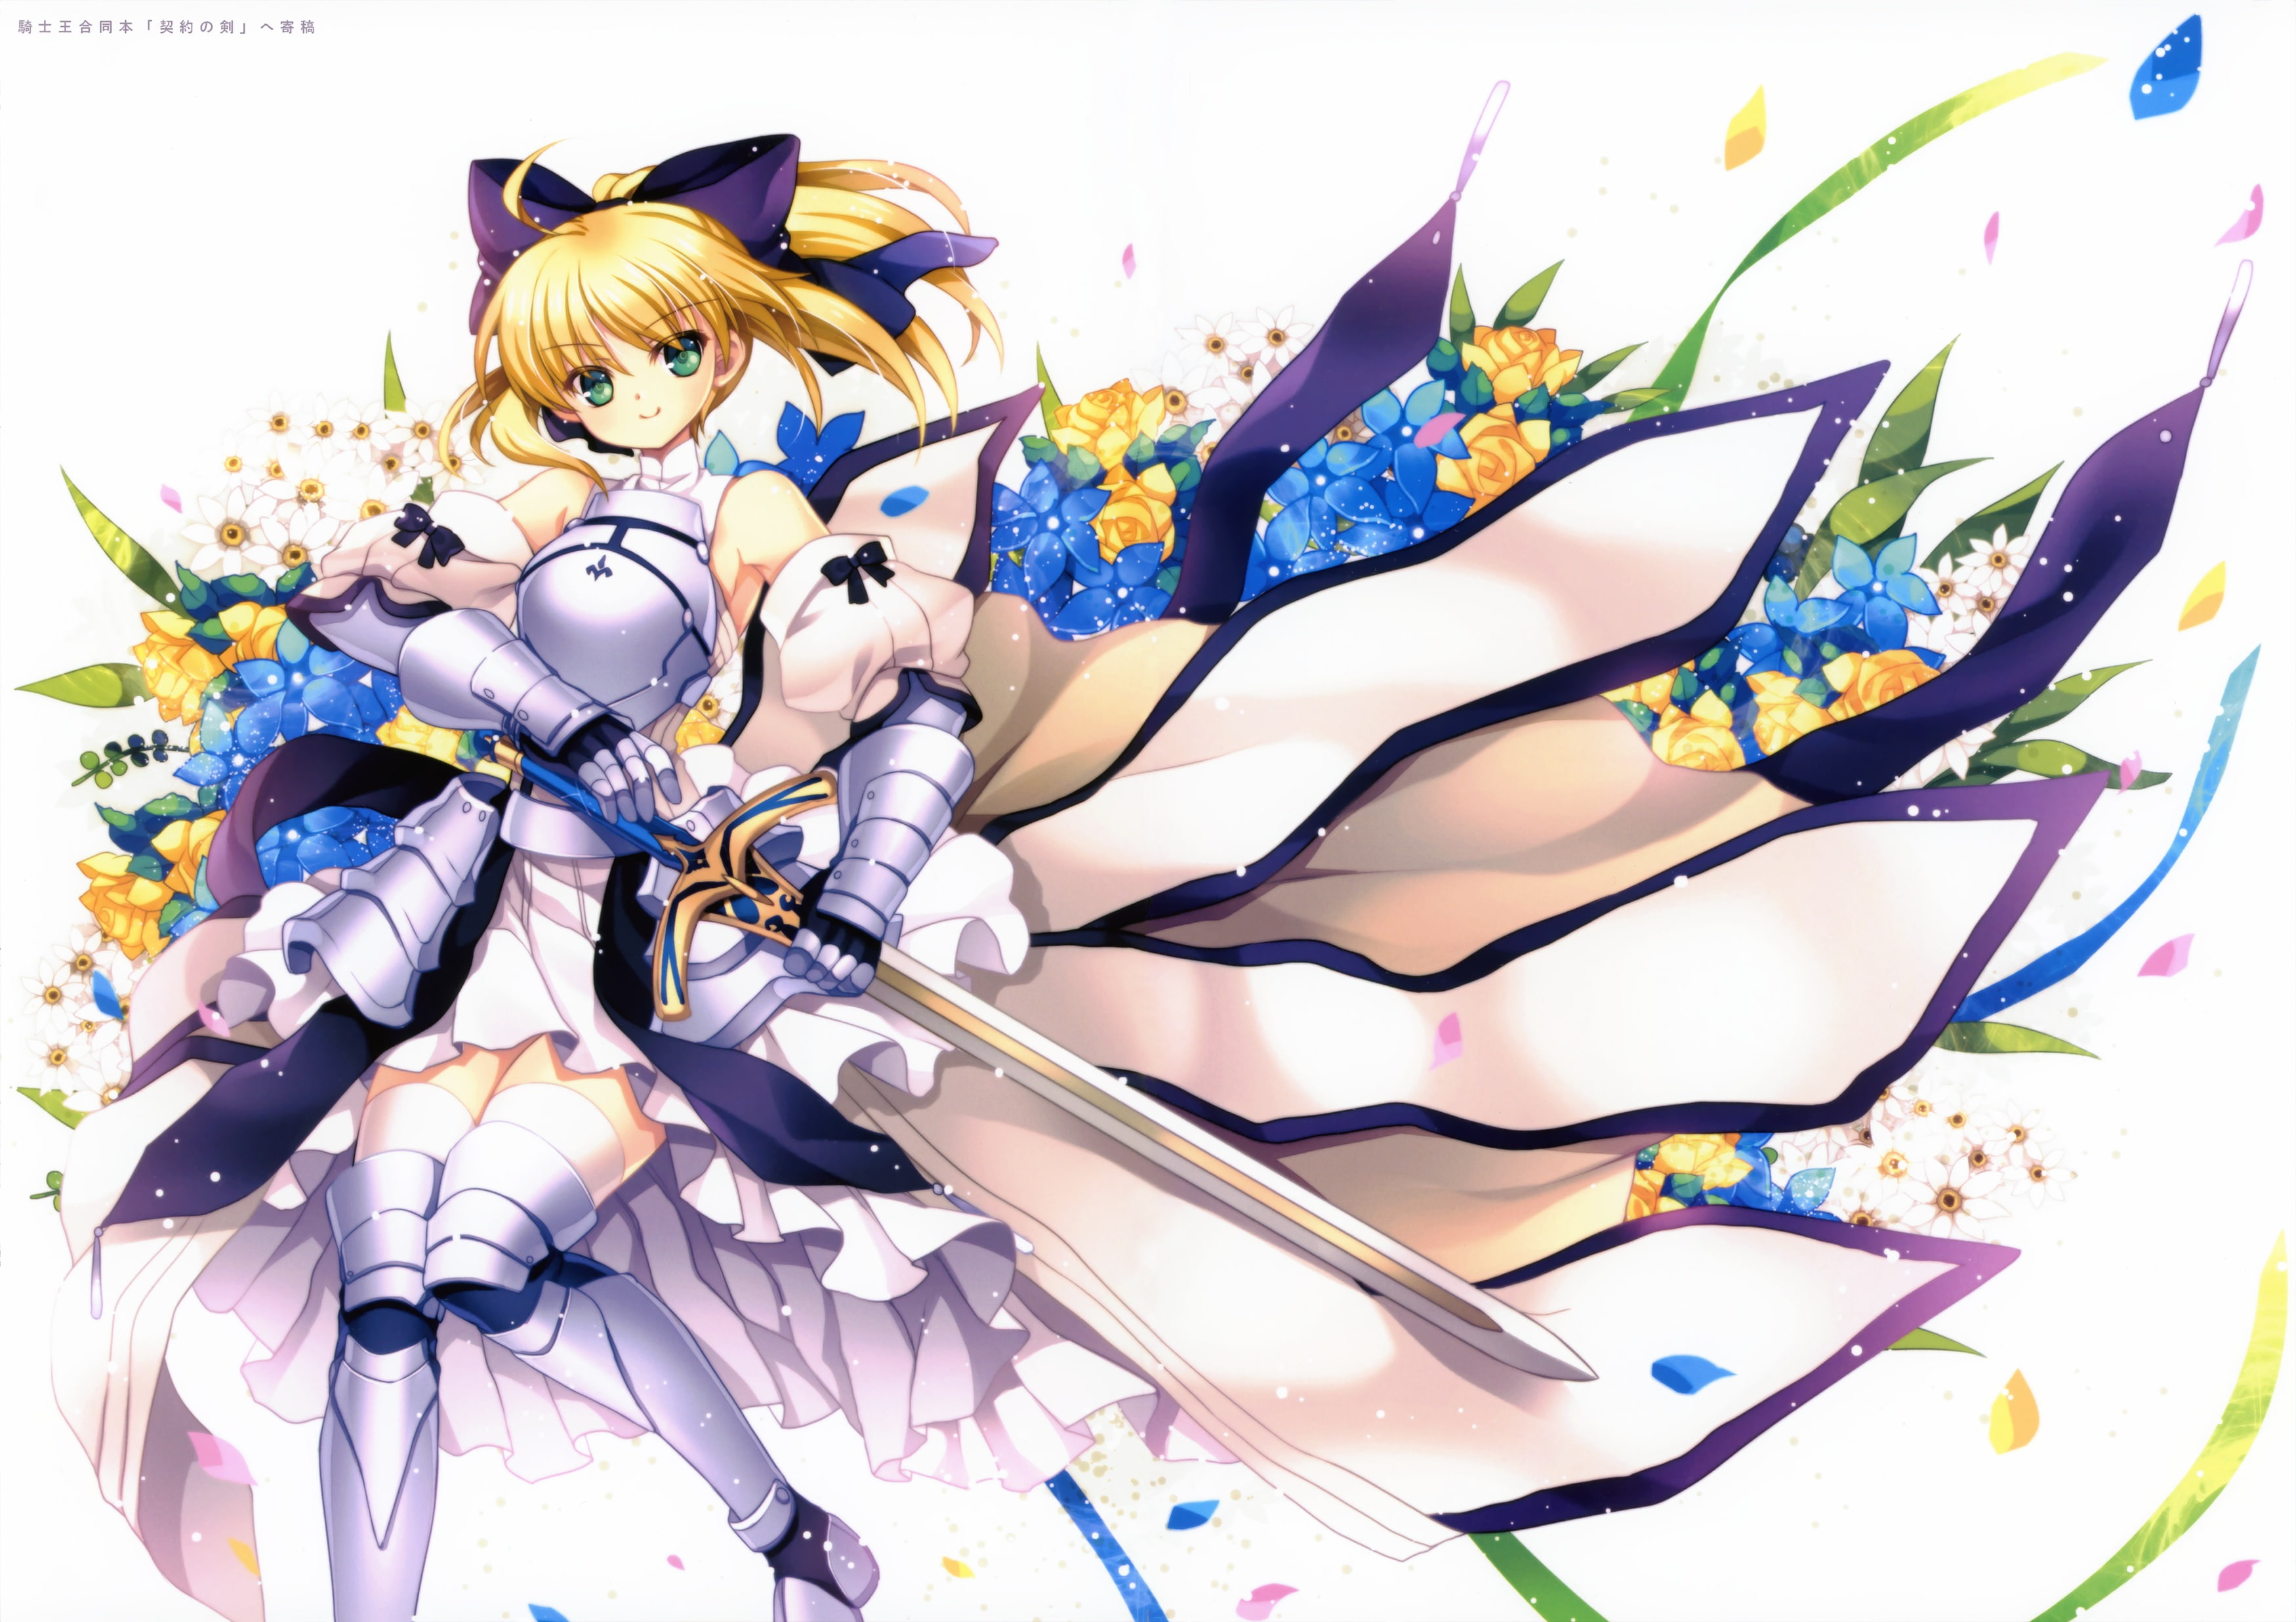 codes, eternal, fate, lily, night, phantasia, saber, stay, sword